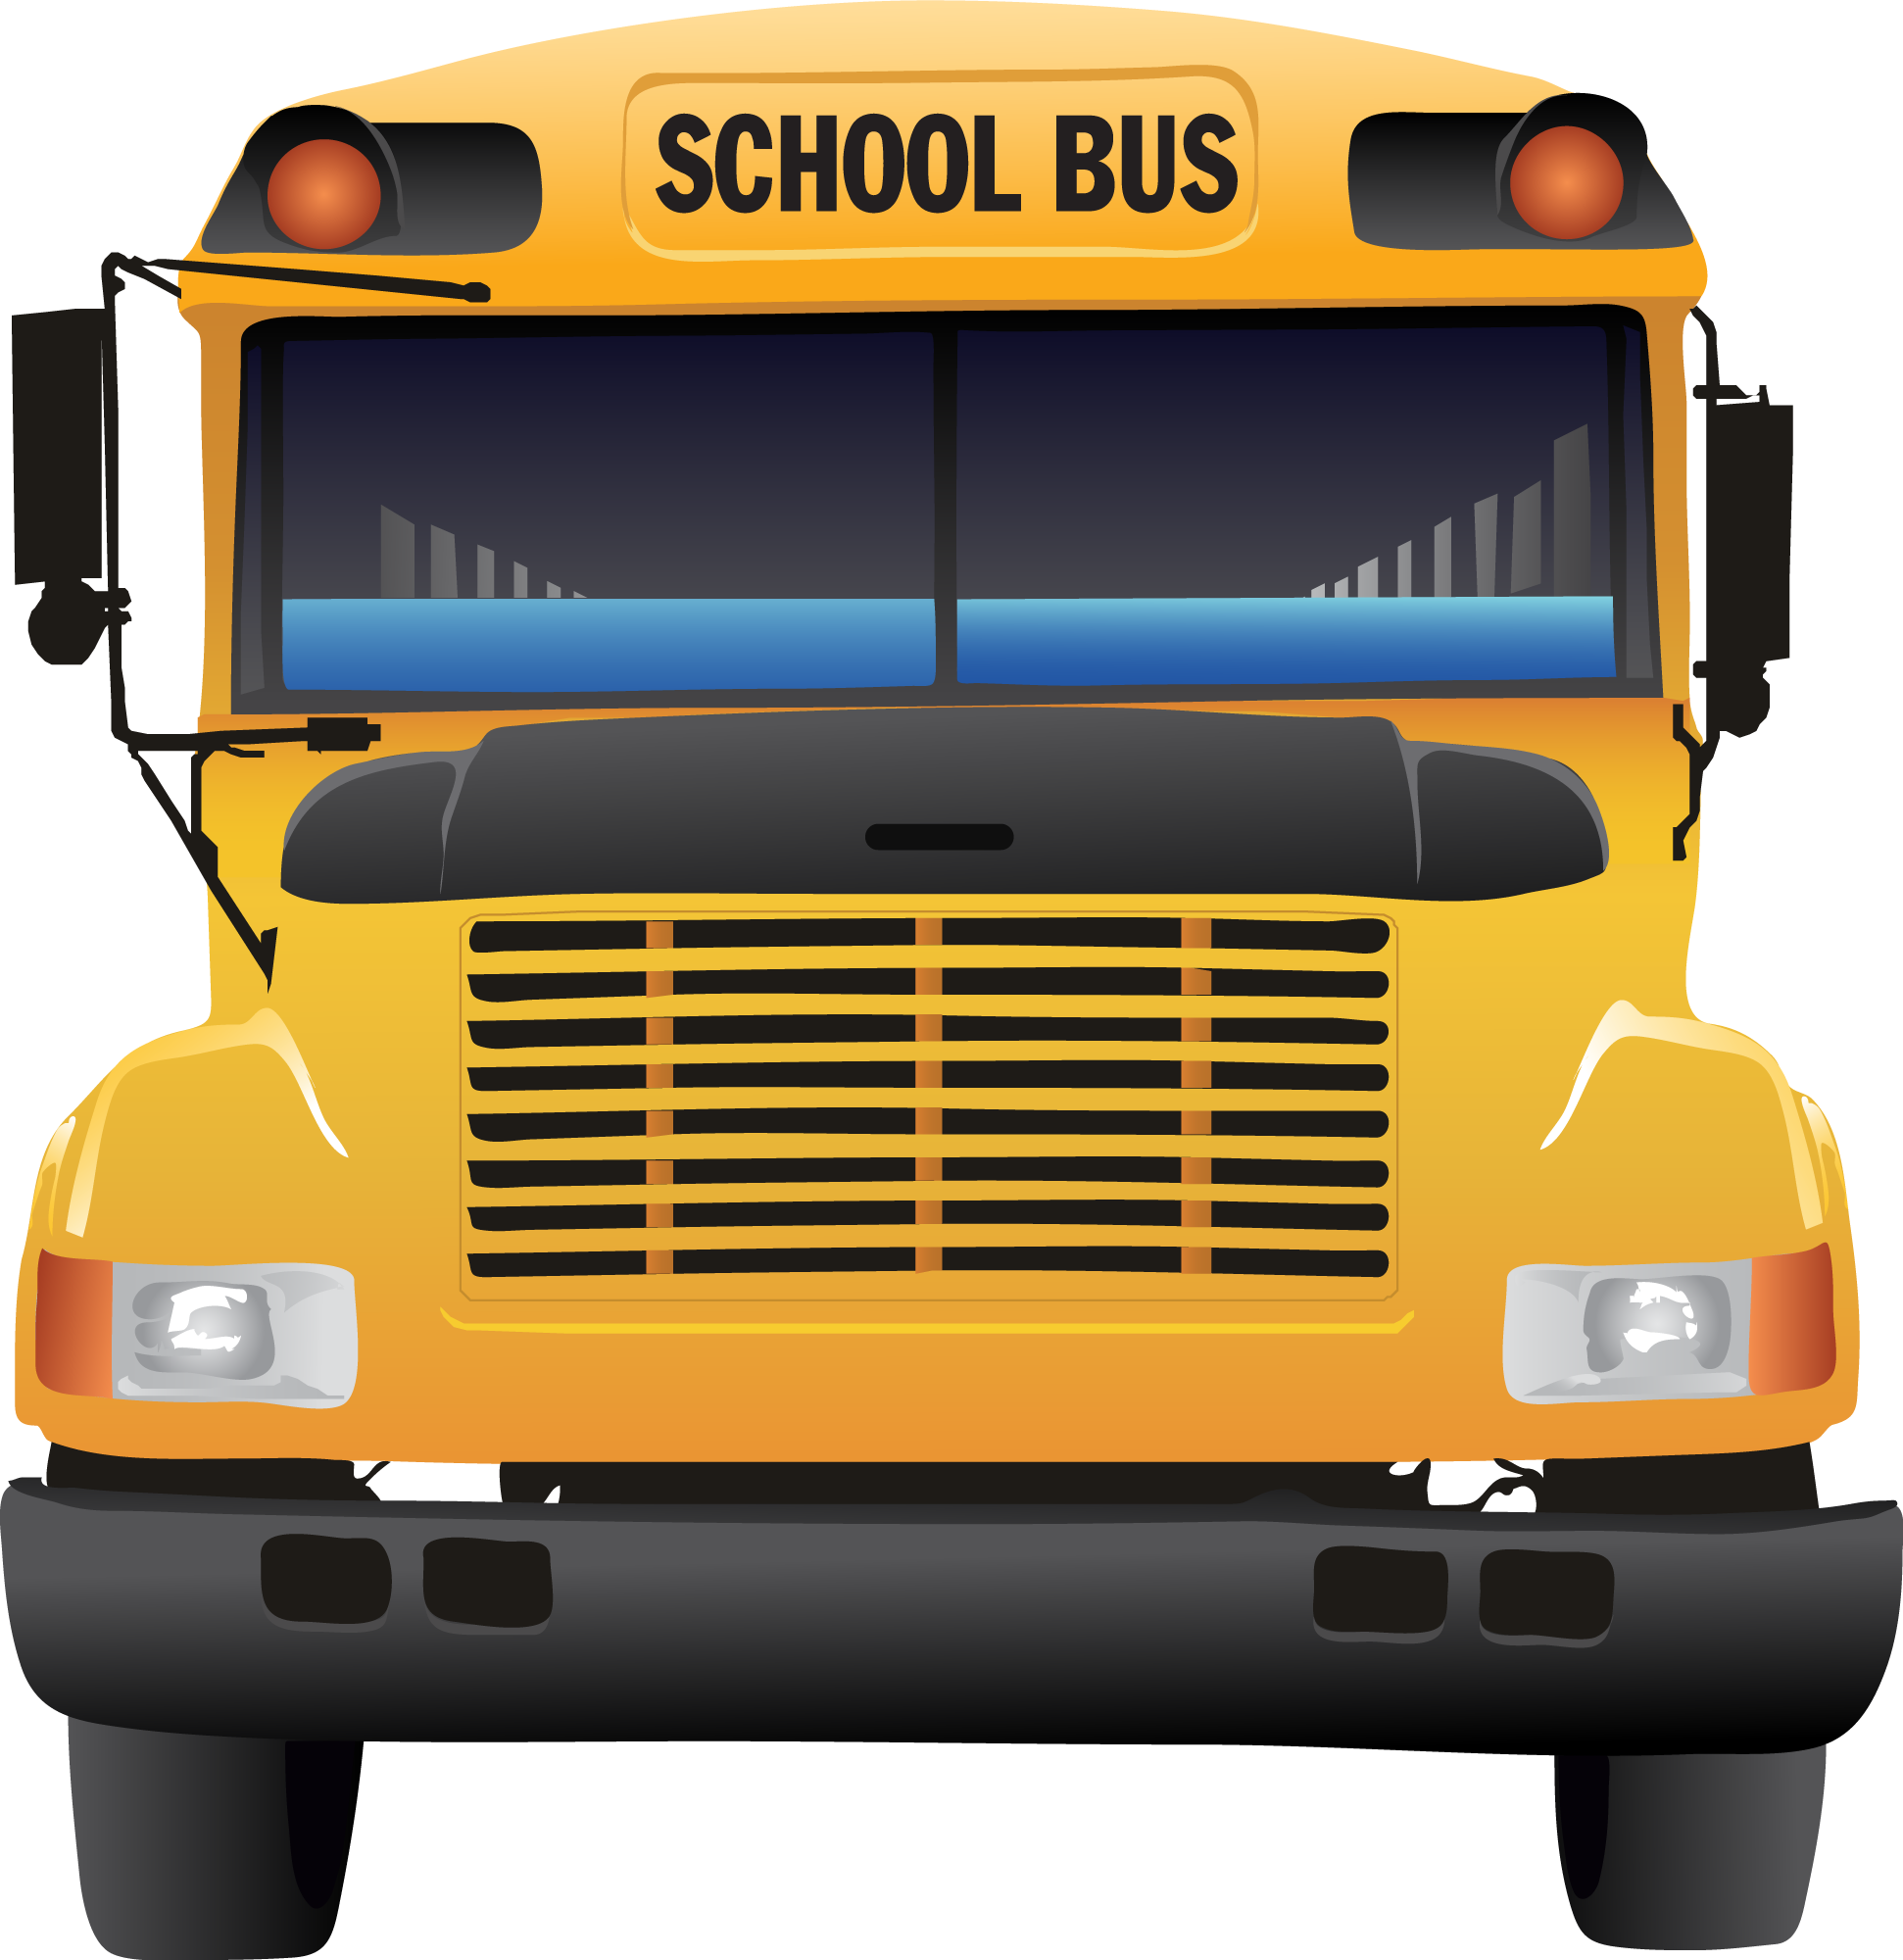 free clipart of school buses - photo #9